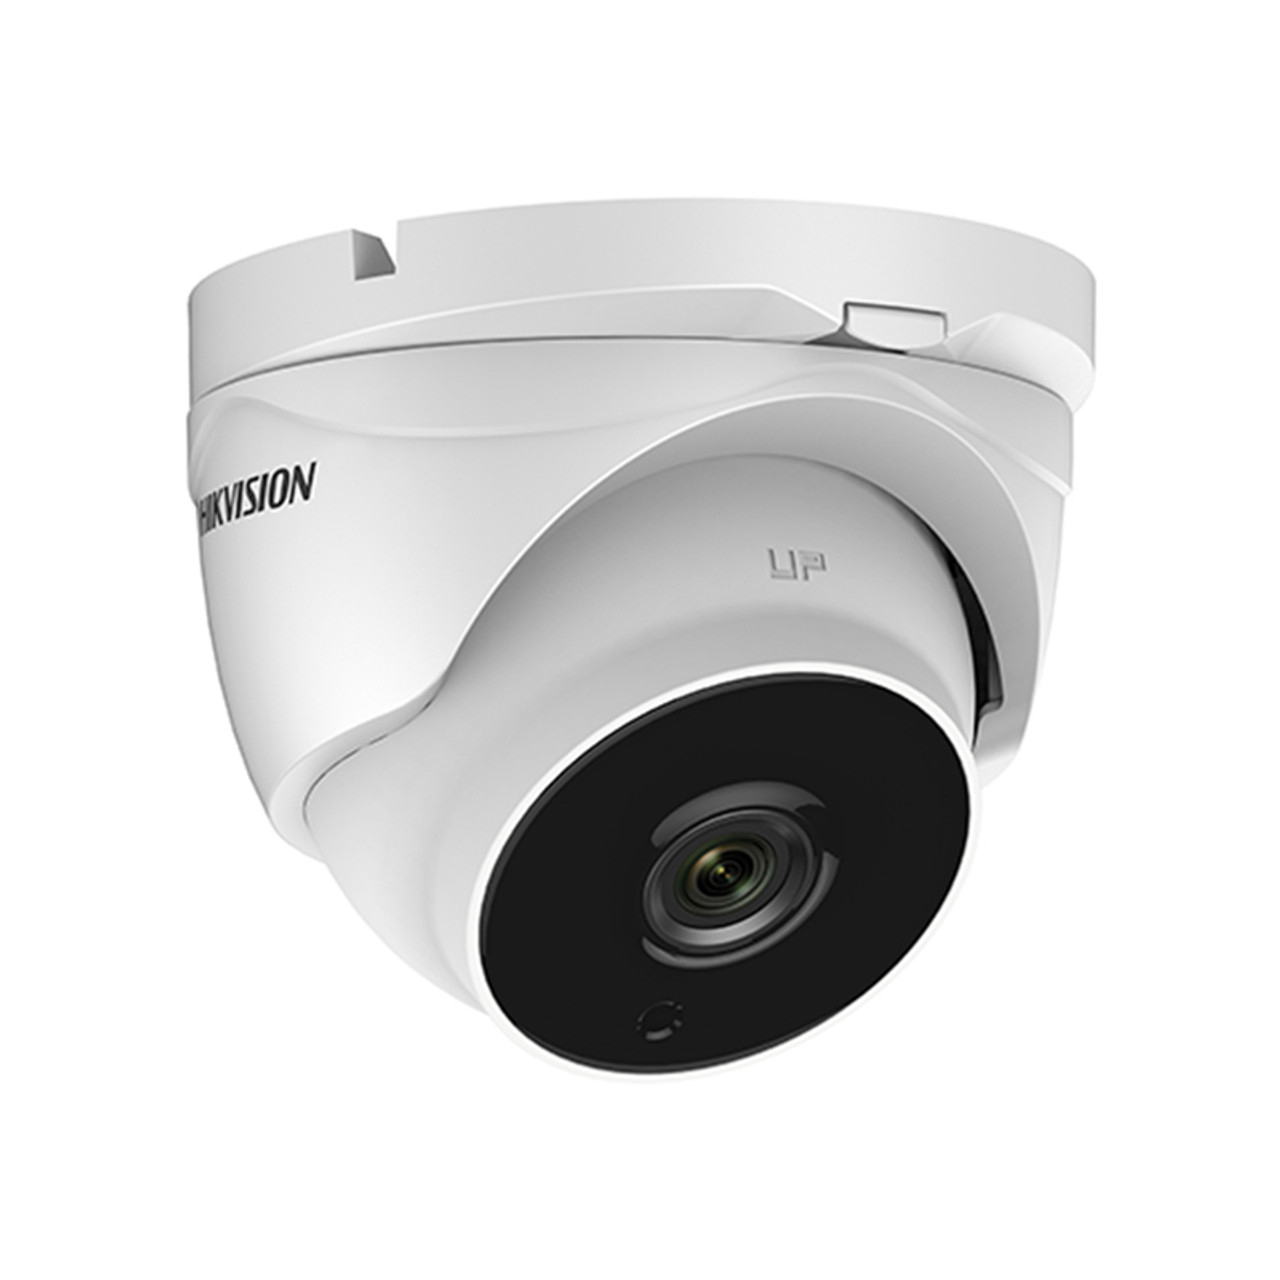 Hikvision DS-2CE56D8T-IT3Z Outdoor Turret HD CCTV Camera